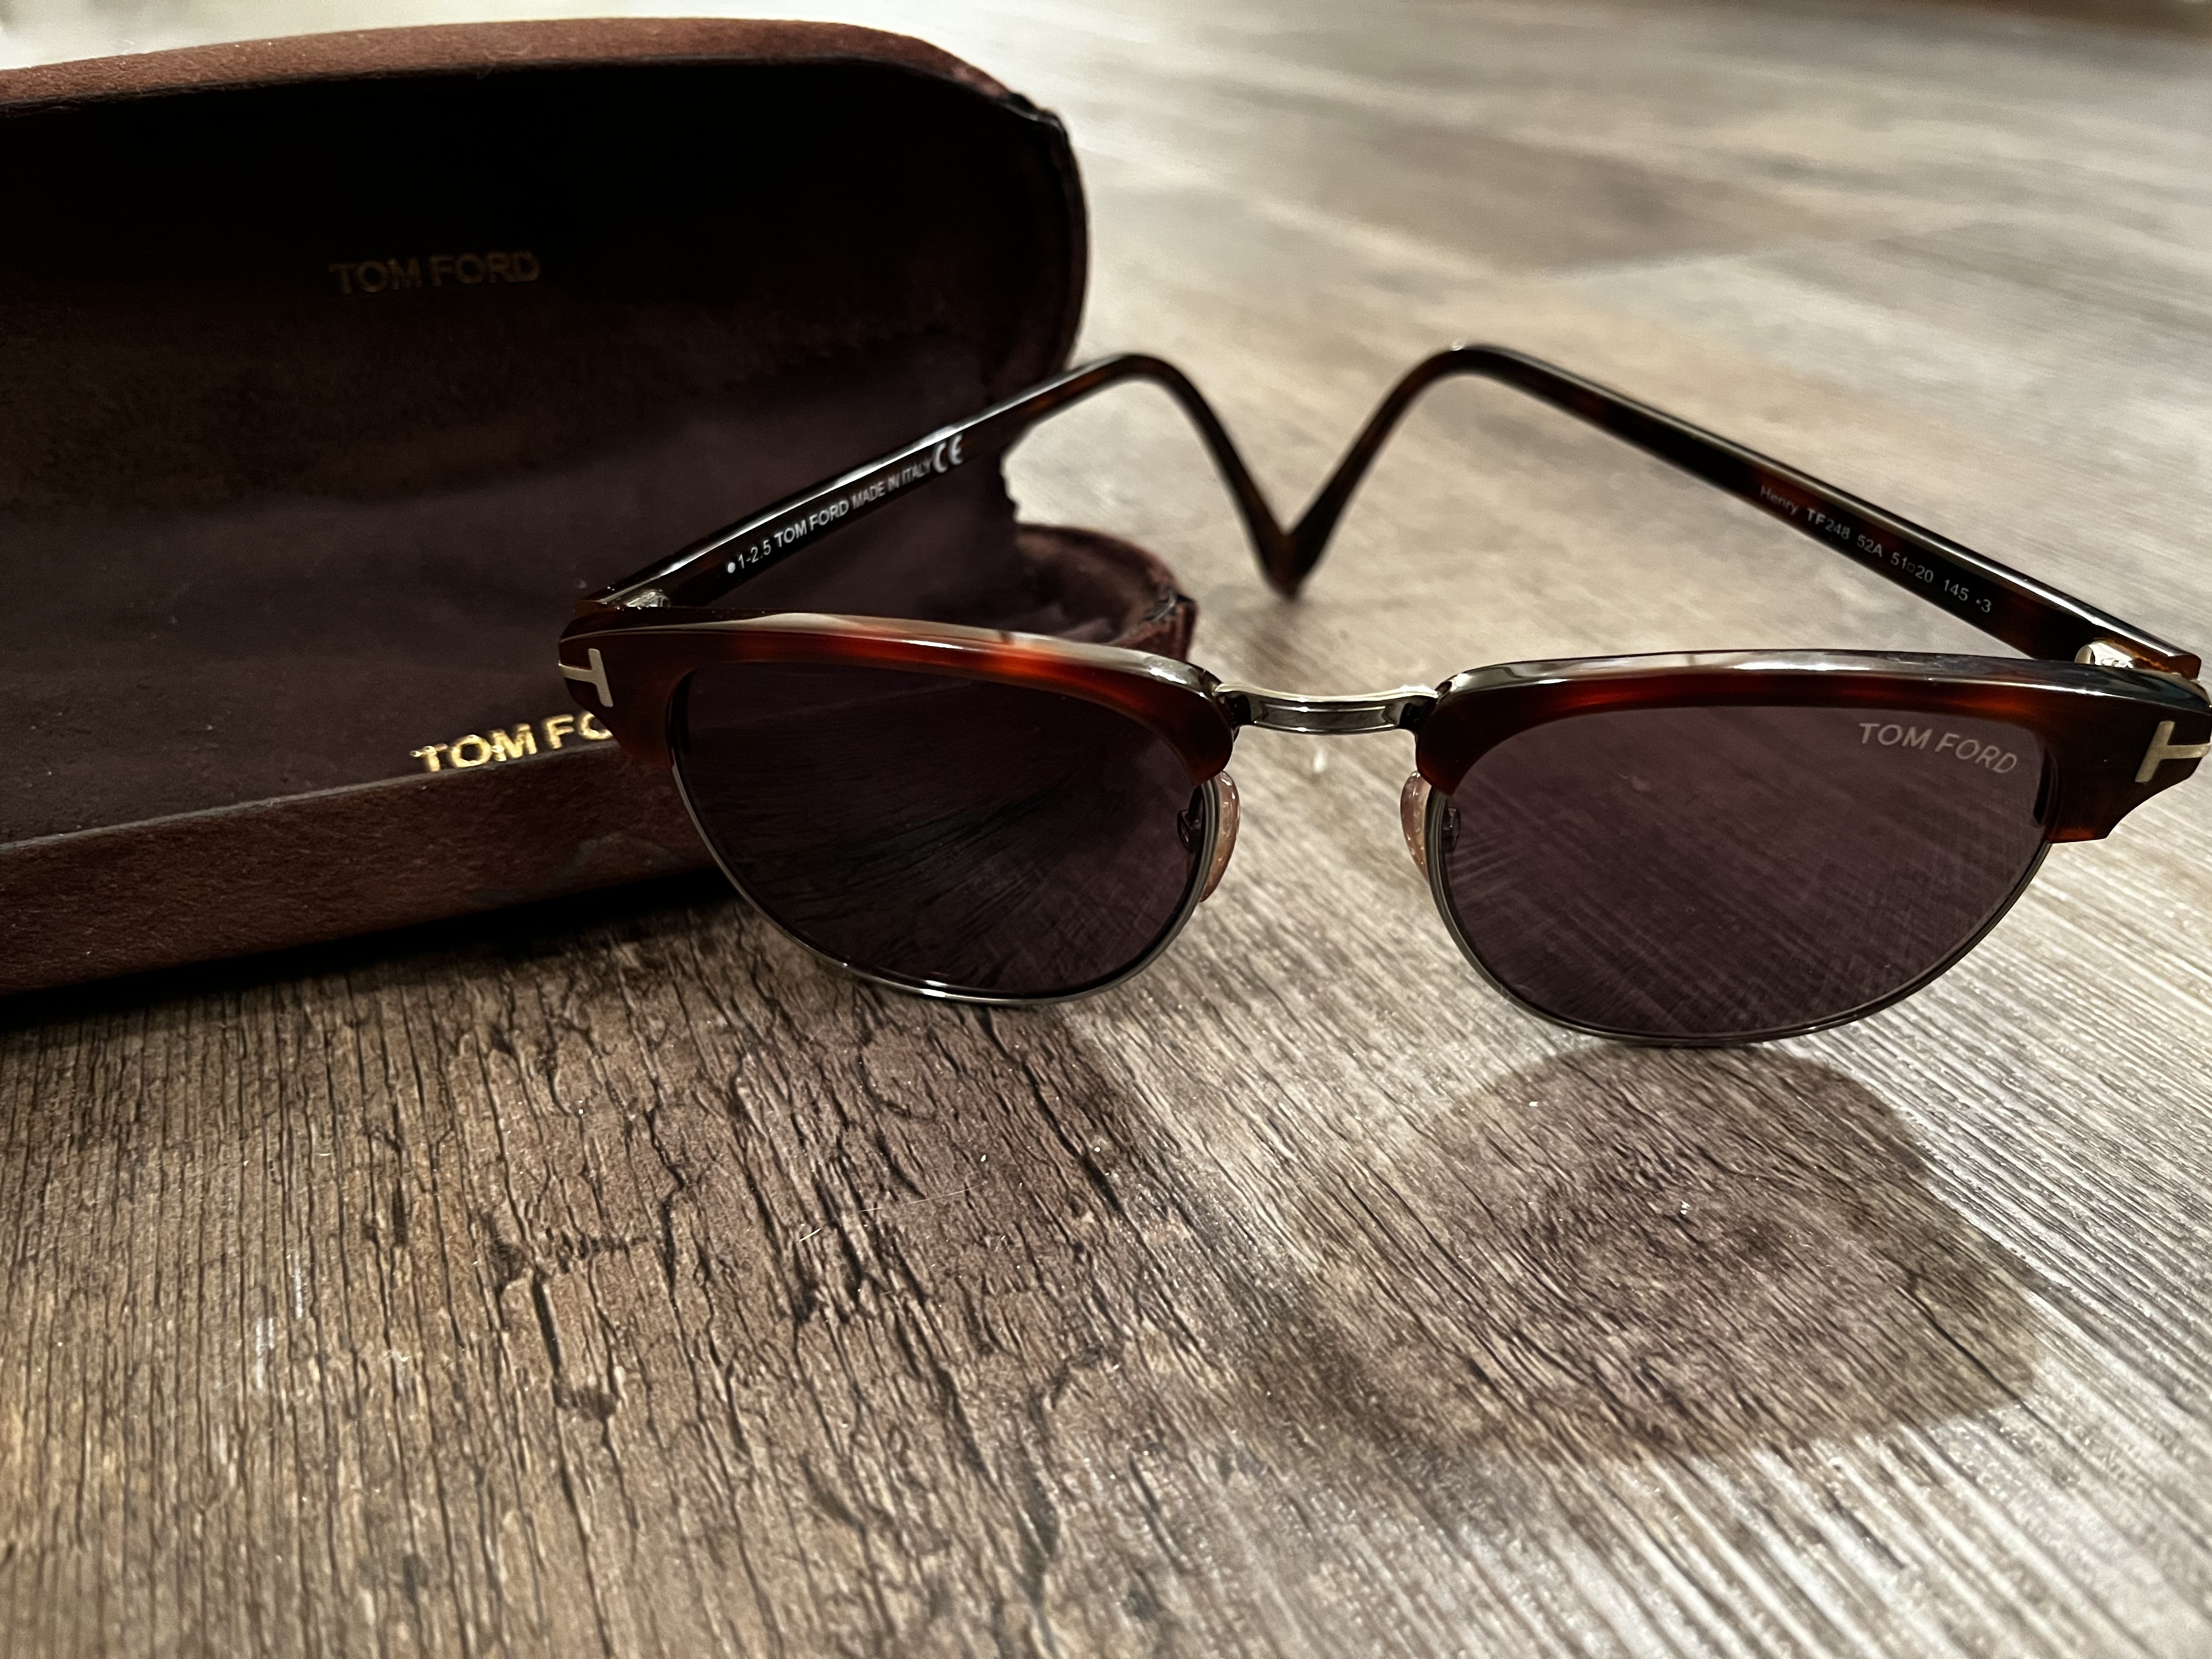 SOLD** FS: Tom Ford Henry Sunglasses as seen in Spectre — ajb007